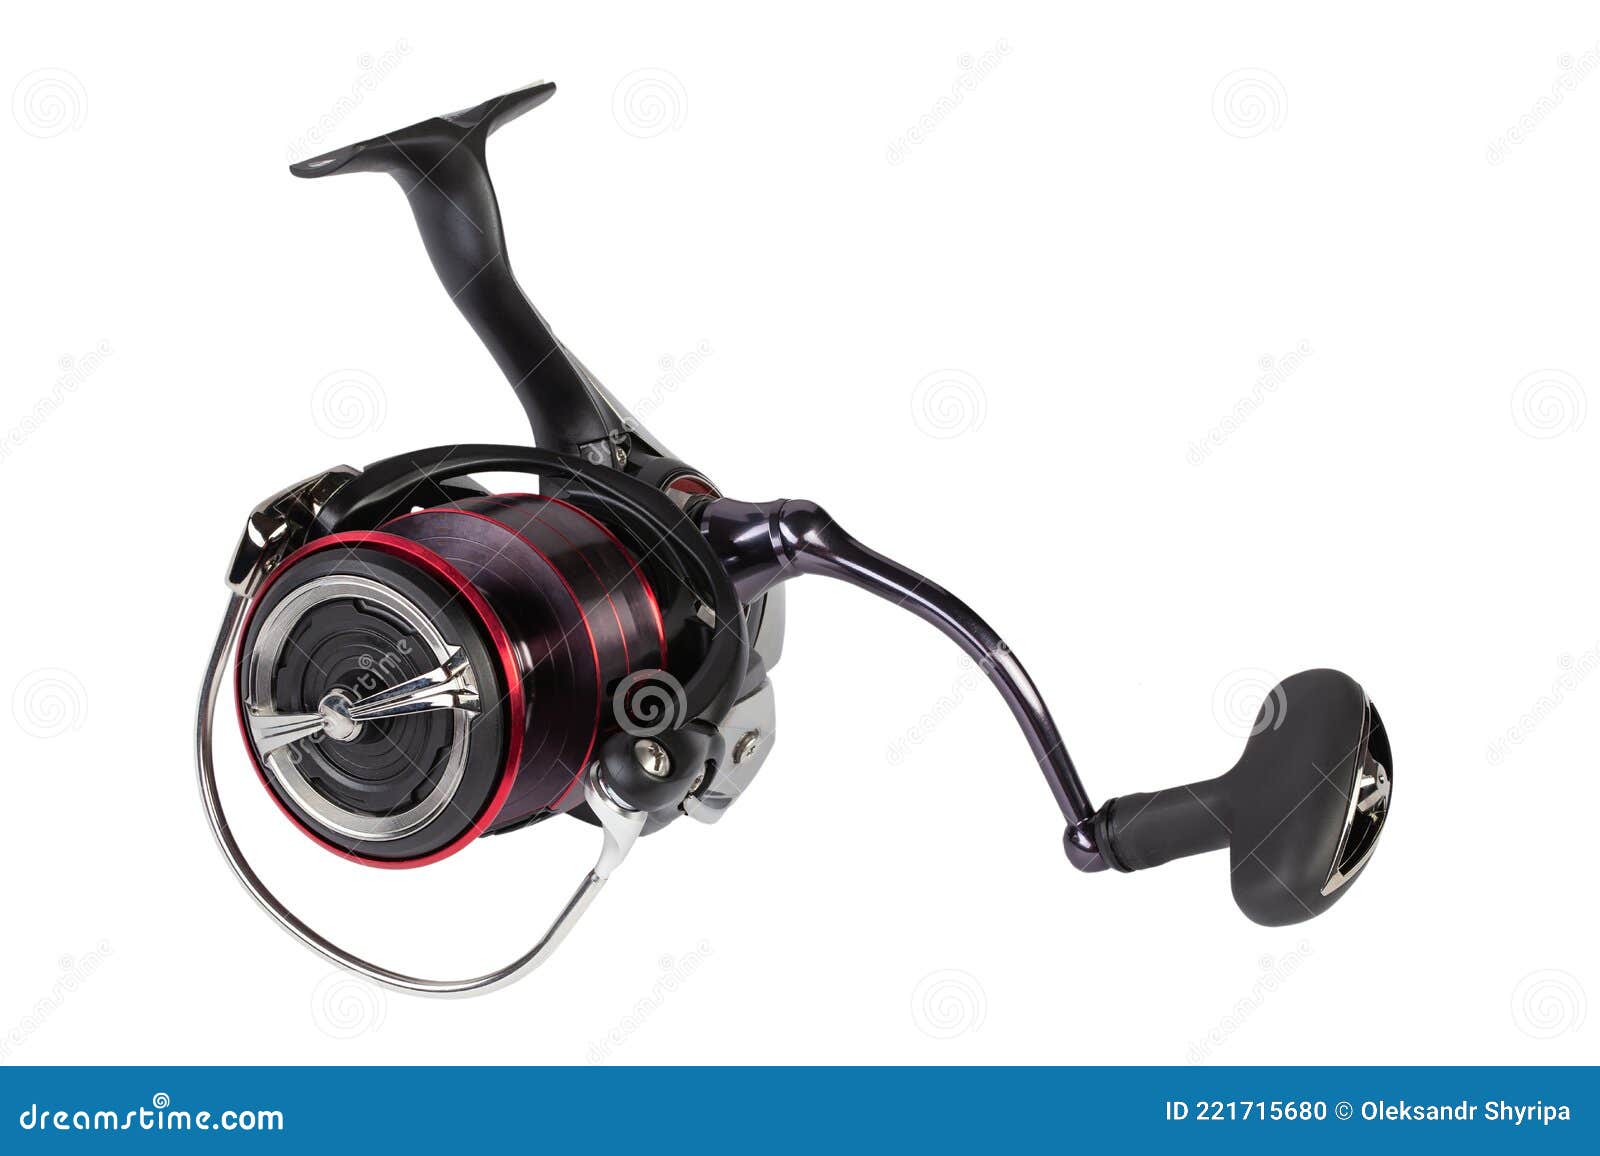 Spinning Fishing Reel Isolated on a White Background. Fishing Gear